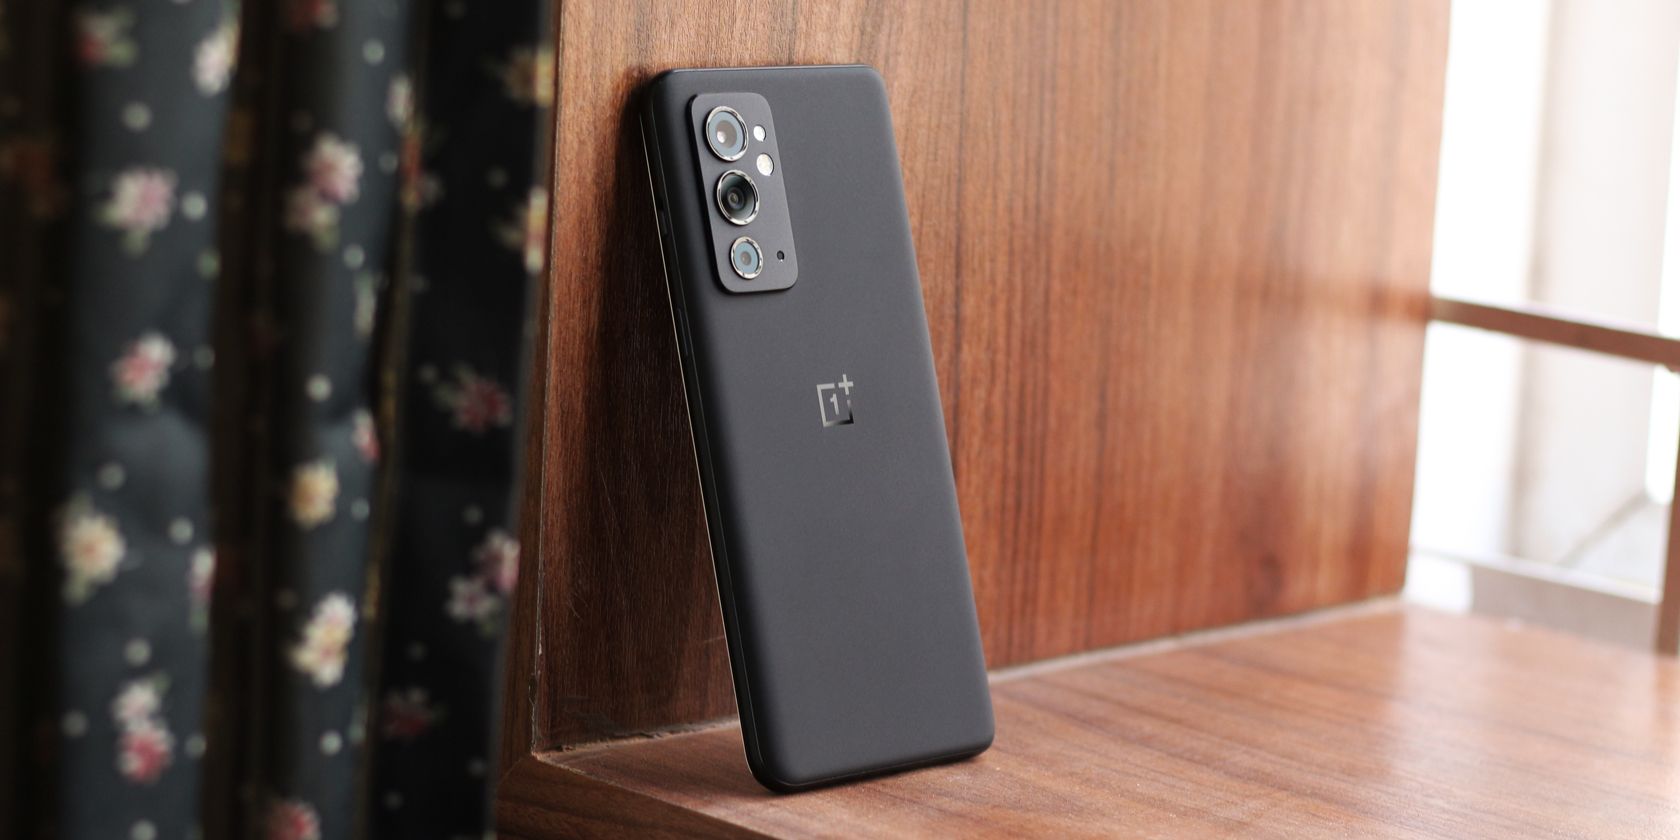 A black OnePlus phone propped up against a wooden frame